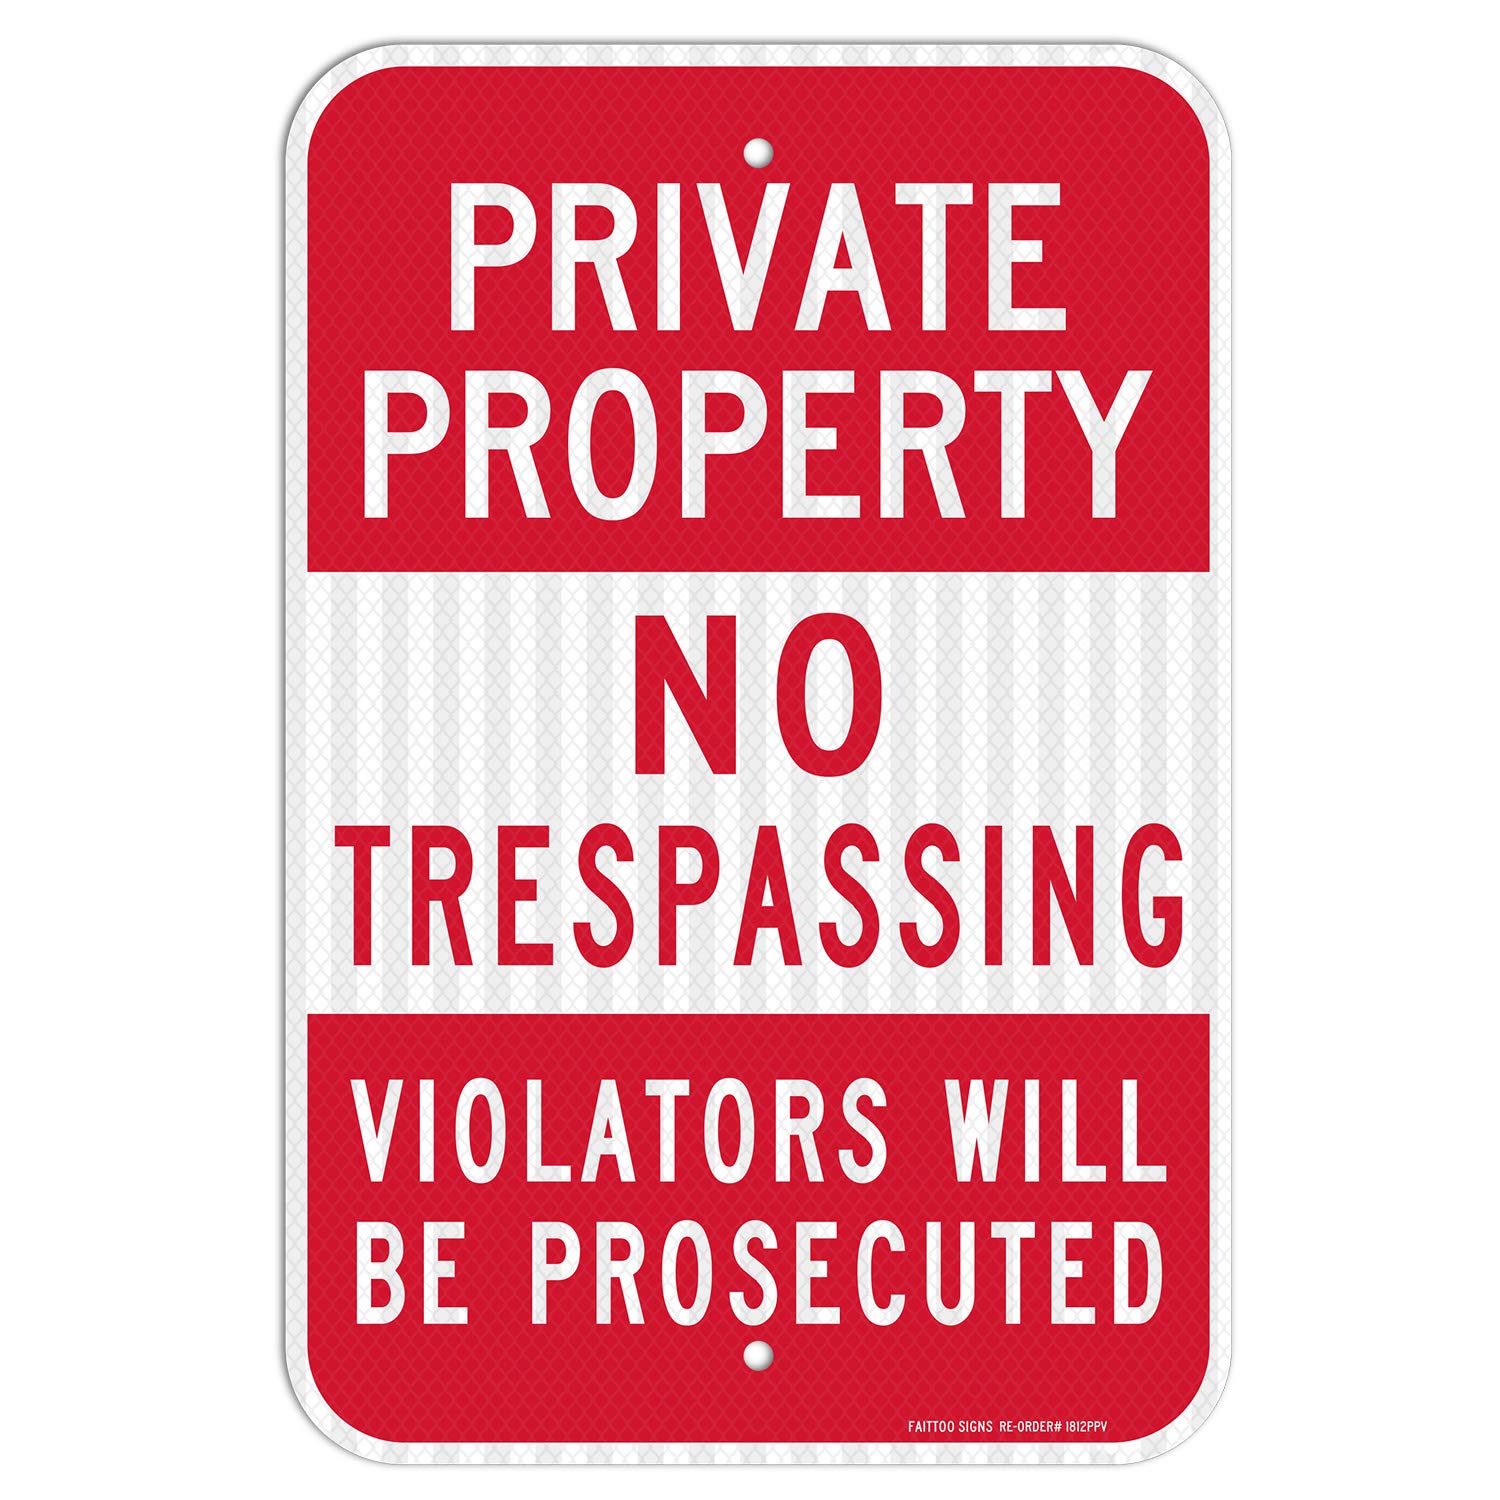 Private Property No Trespassing Sign, Violators Will Be Prosecuted , 18 x 12 Inches Engineer Grade Reflective Sheeting Rust Free Aluminum, Weather Resistant, Waterproof, Durable Ink, Easy to Mount